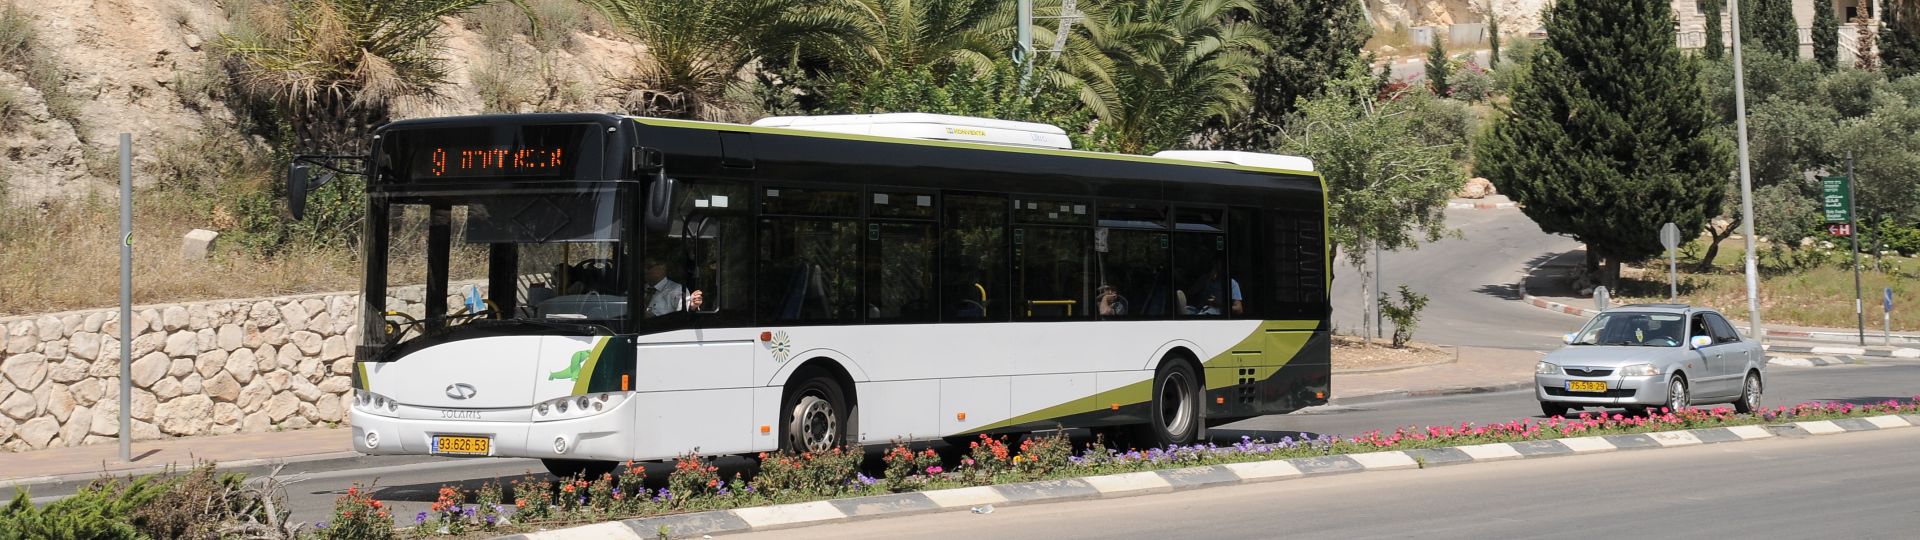 Solaris signs major contracts for 110 buses in Israel